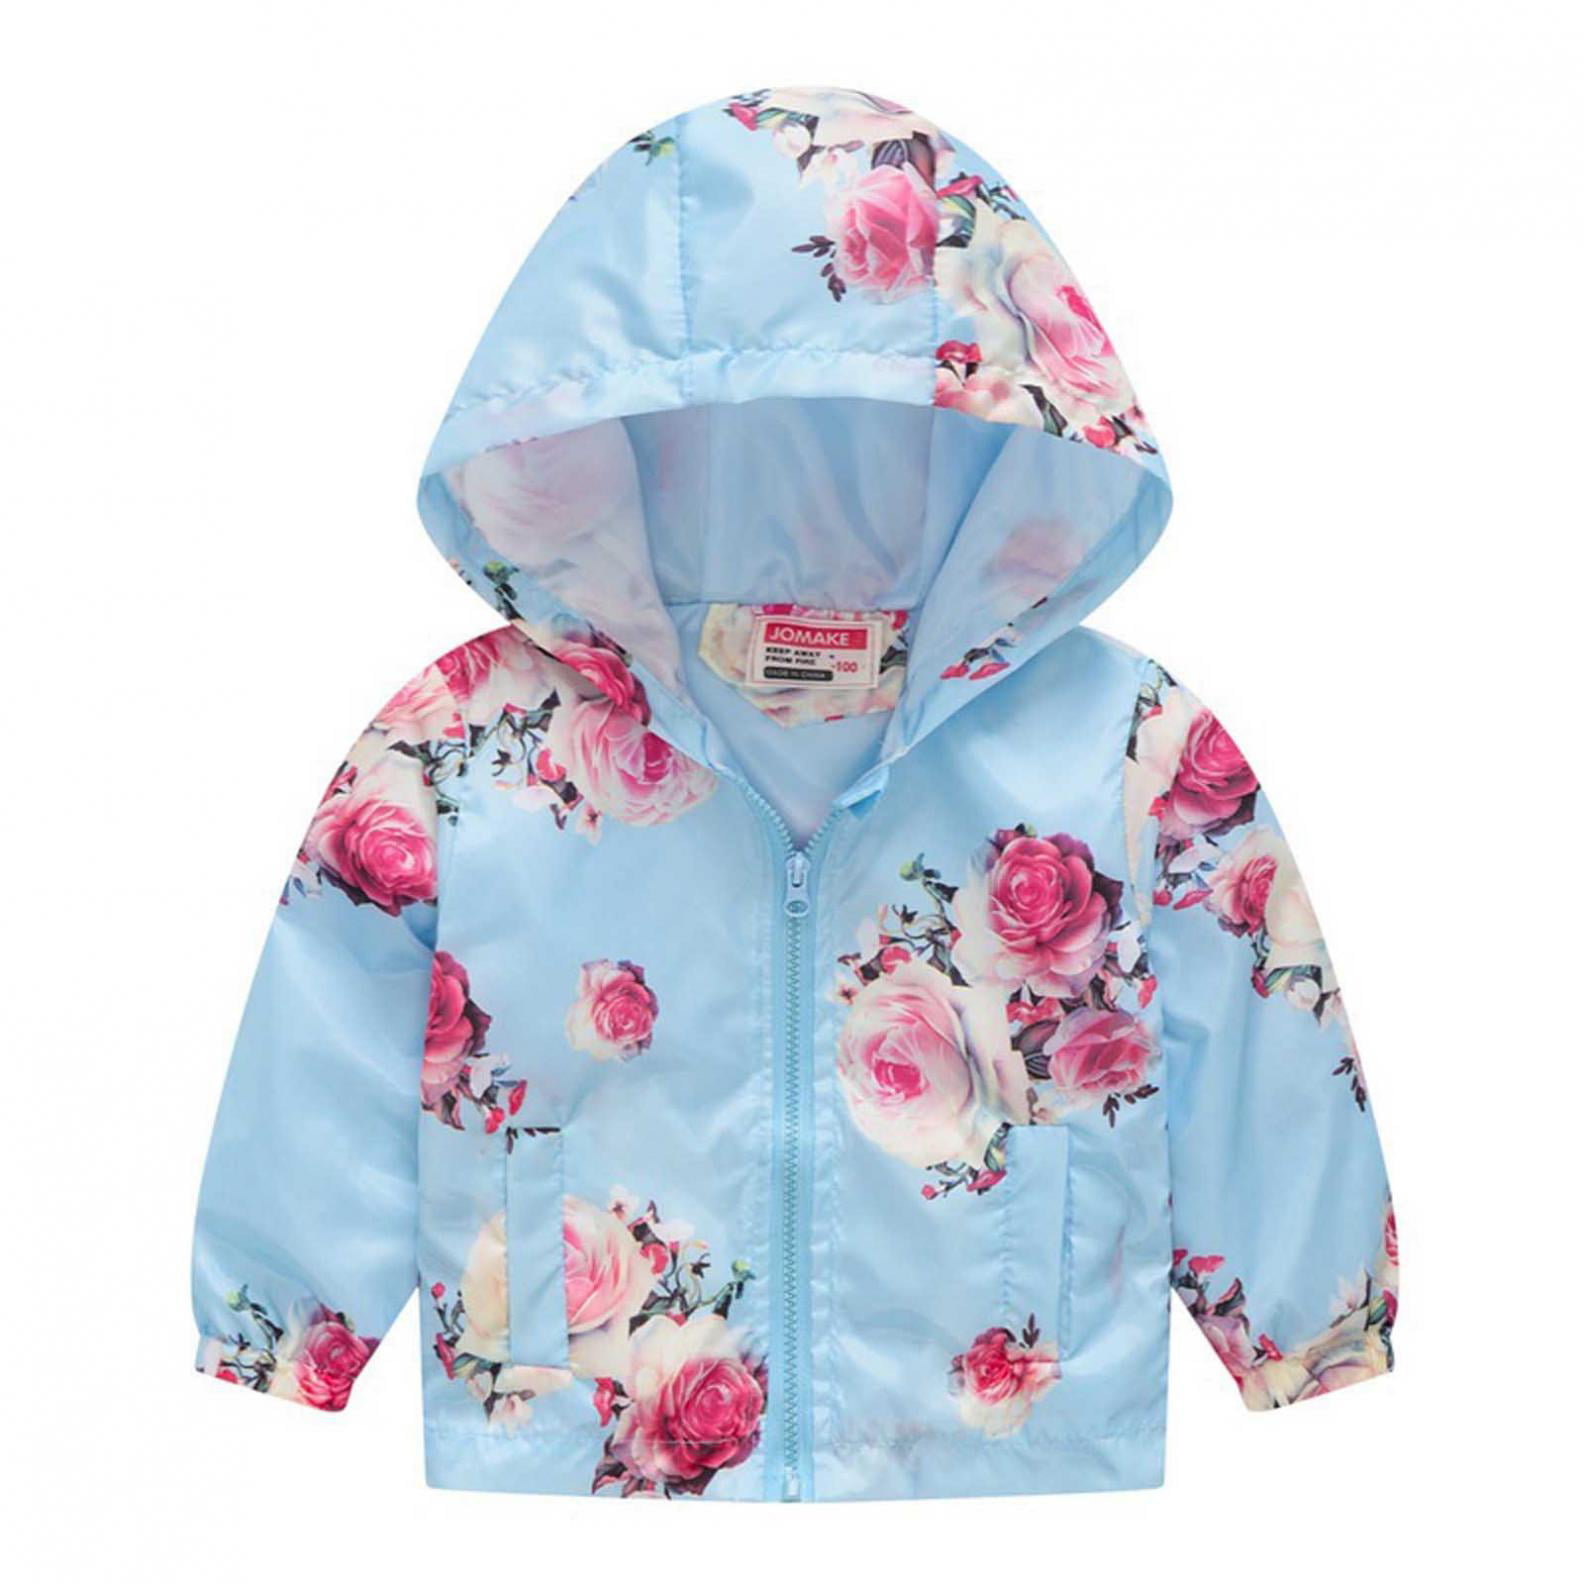 Details about   Toddler Baby Girl Winter Warm  Hooded Coat Cloak Jacket  Chinese style Clothes 